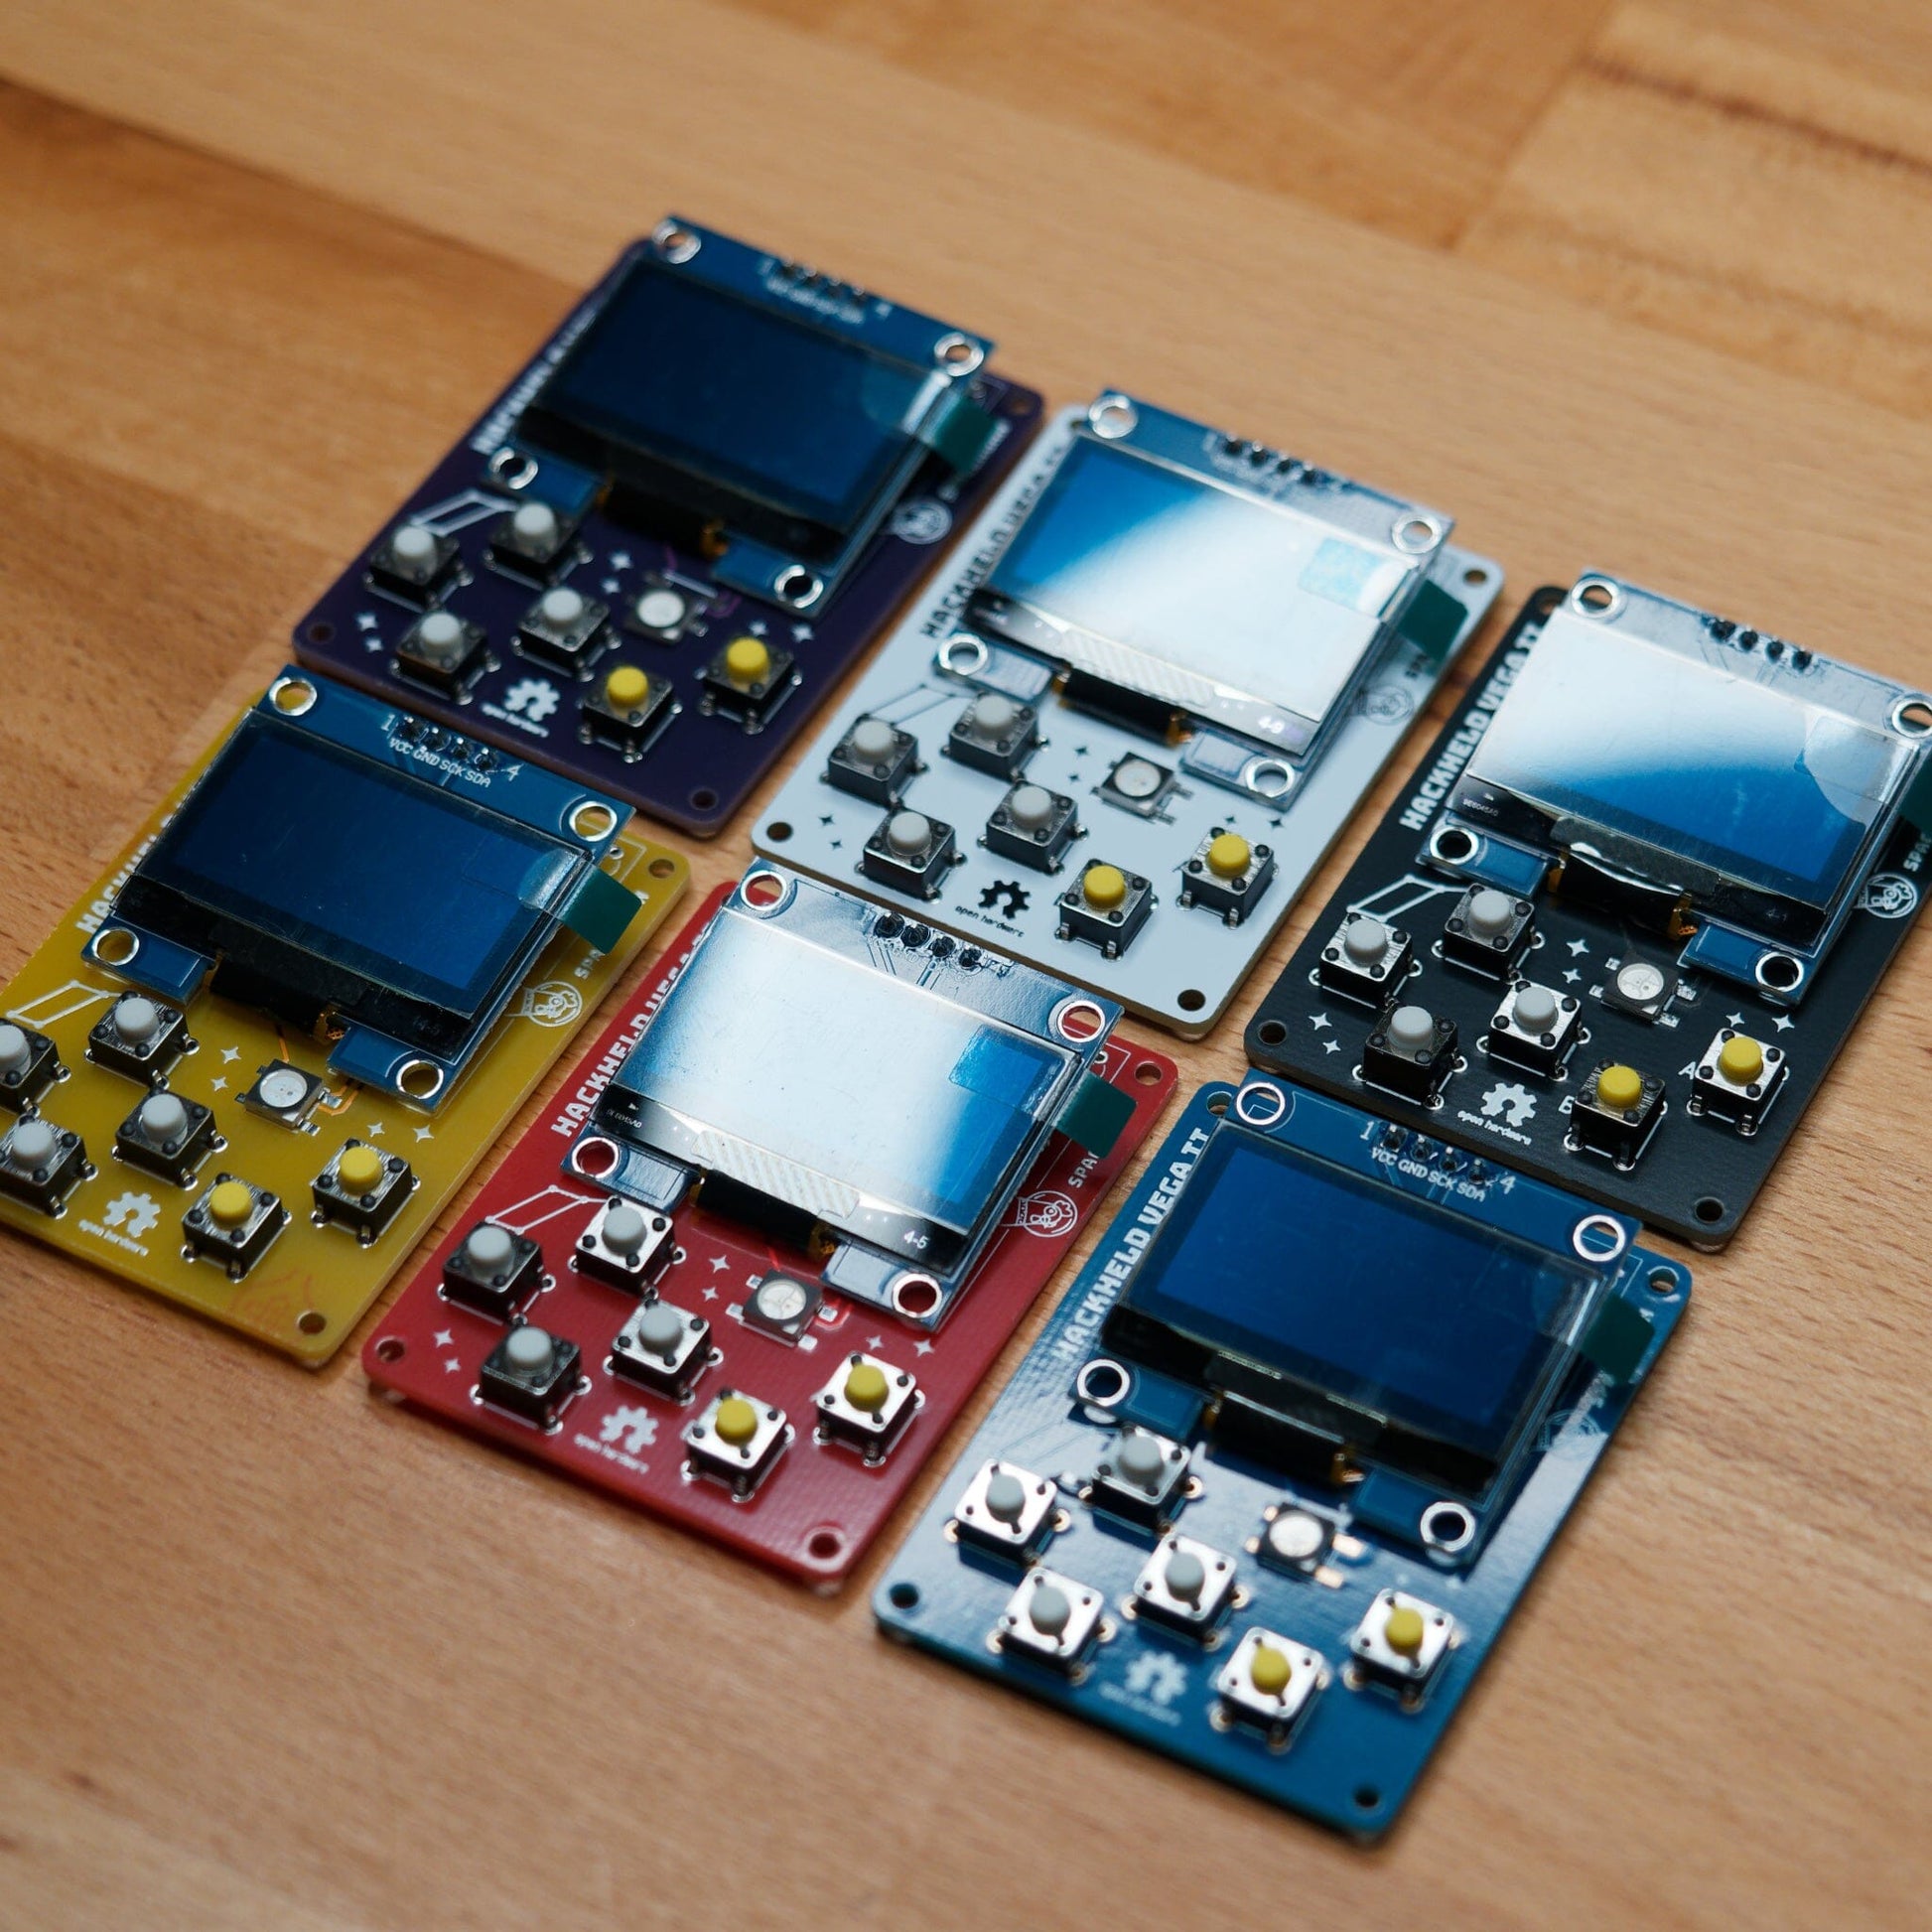 HackHeld Vega II PCBs in purple, white, black, yellow, red, blue with components